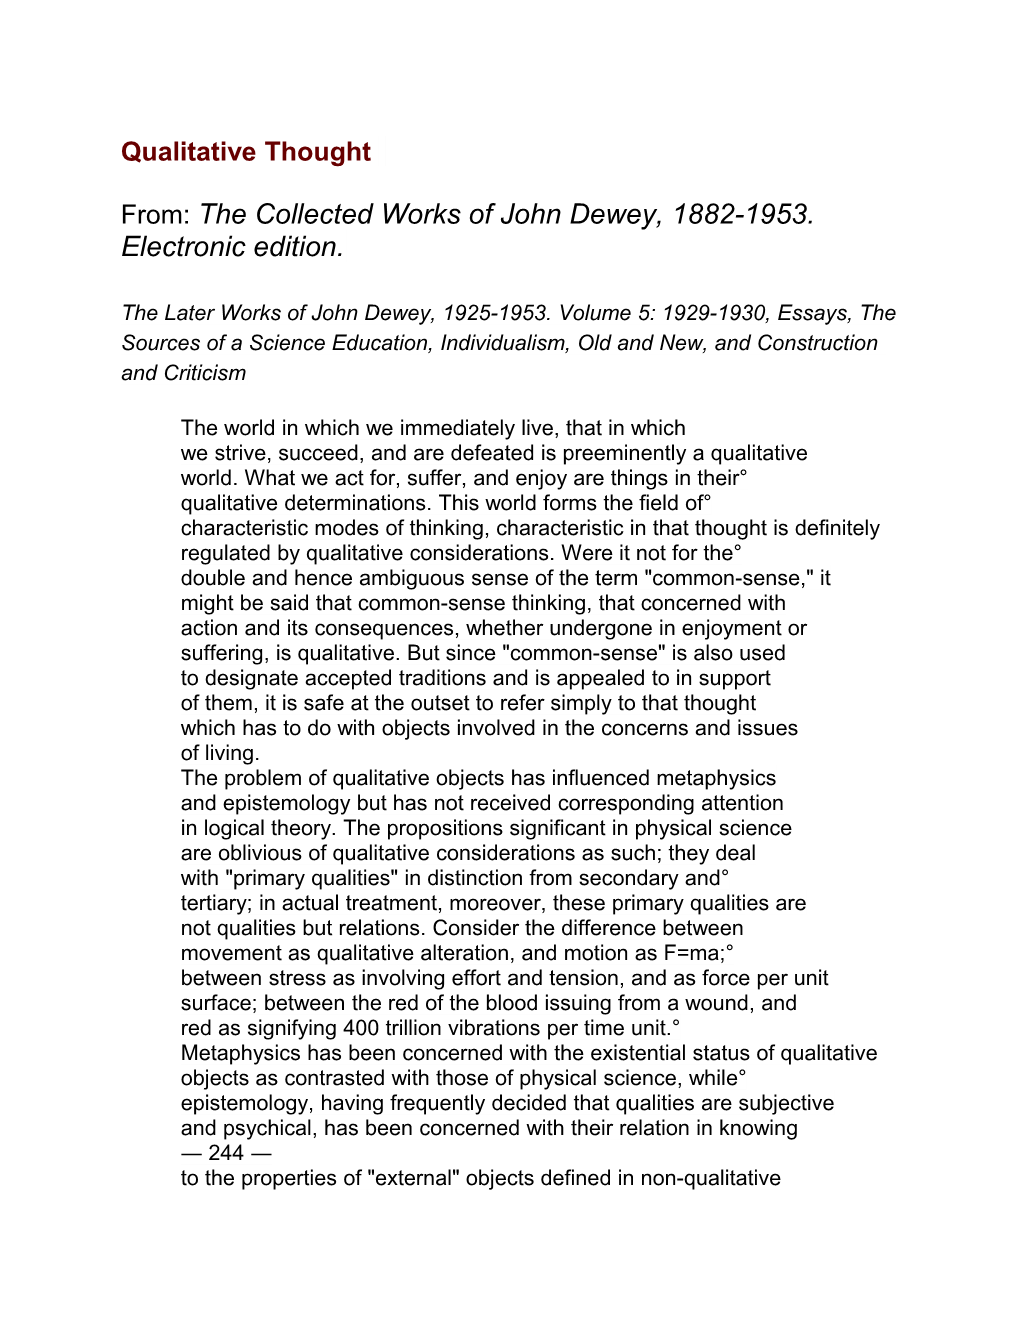 From: the Collected Works of John Dewey, 1882-1953. Electronic Edition